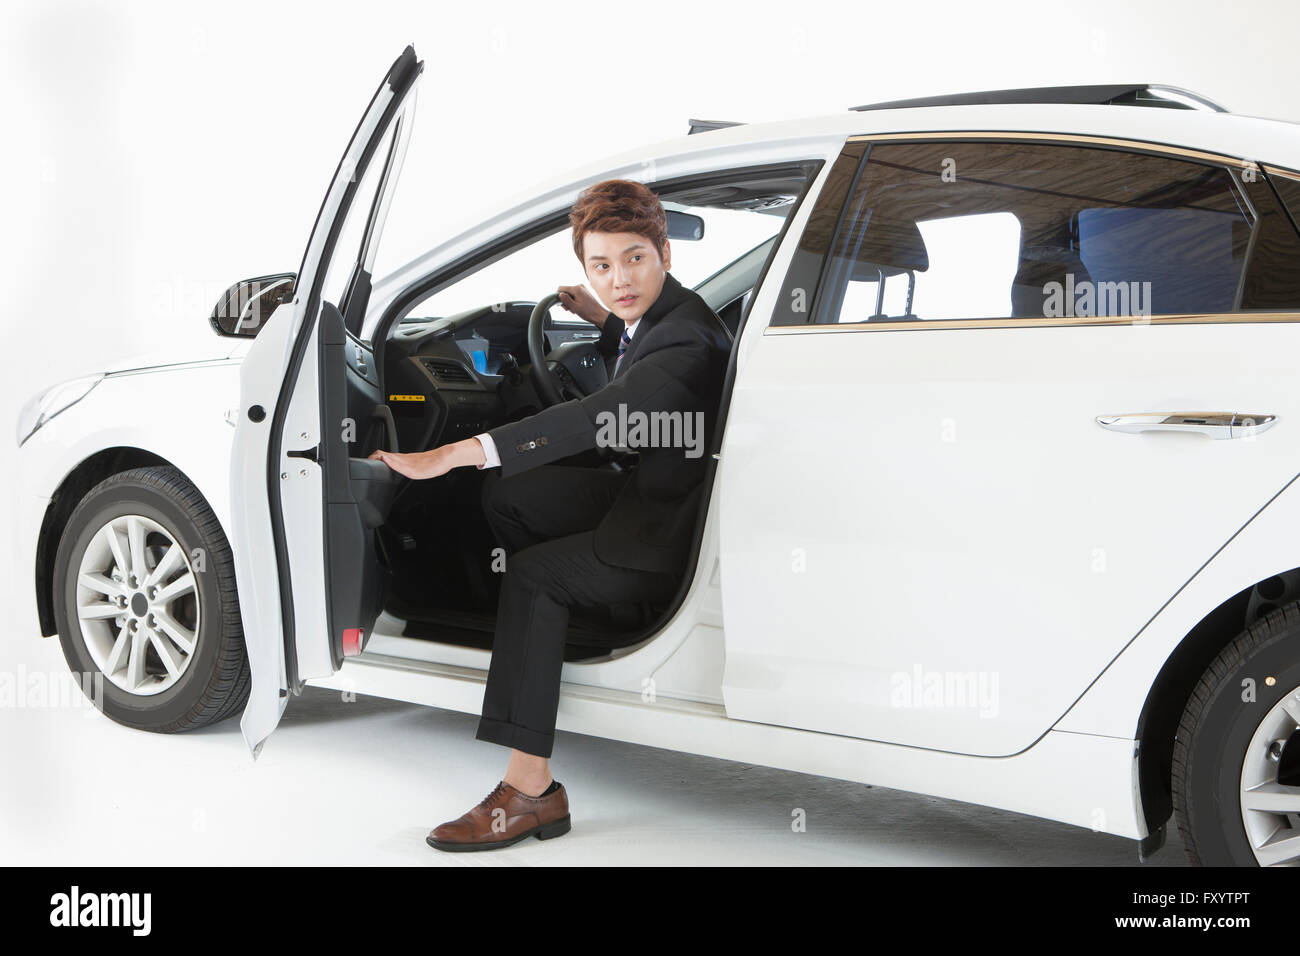 Young man in his early thirties in suit getting off a car Stock Photo